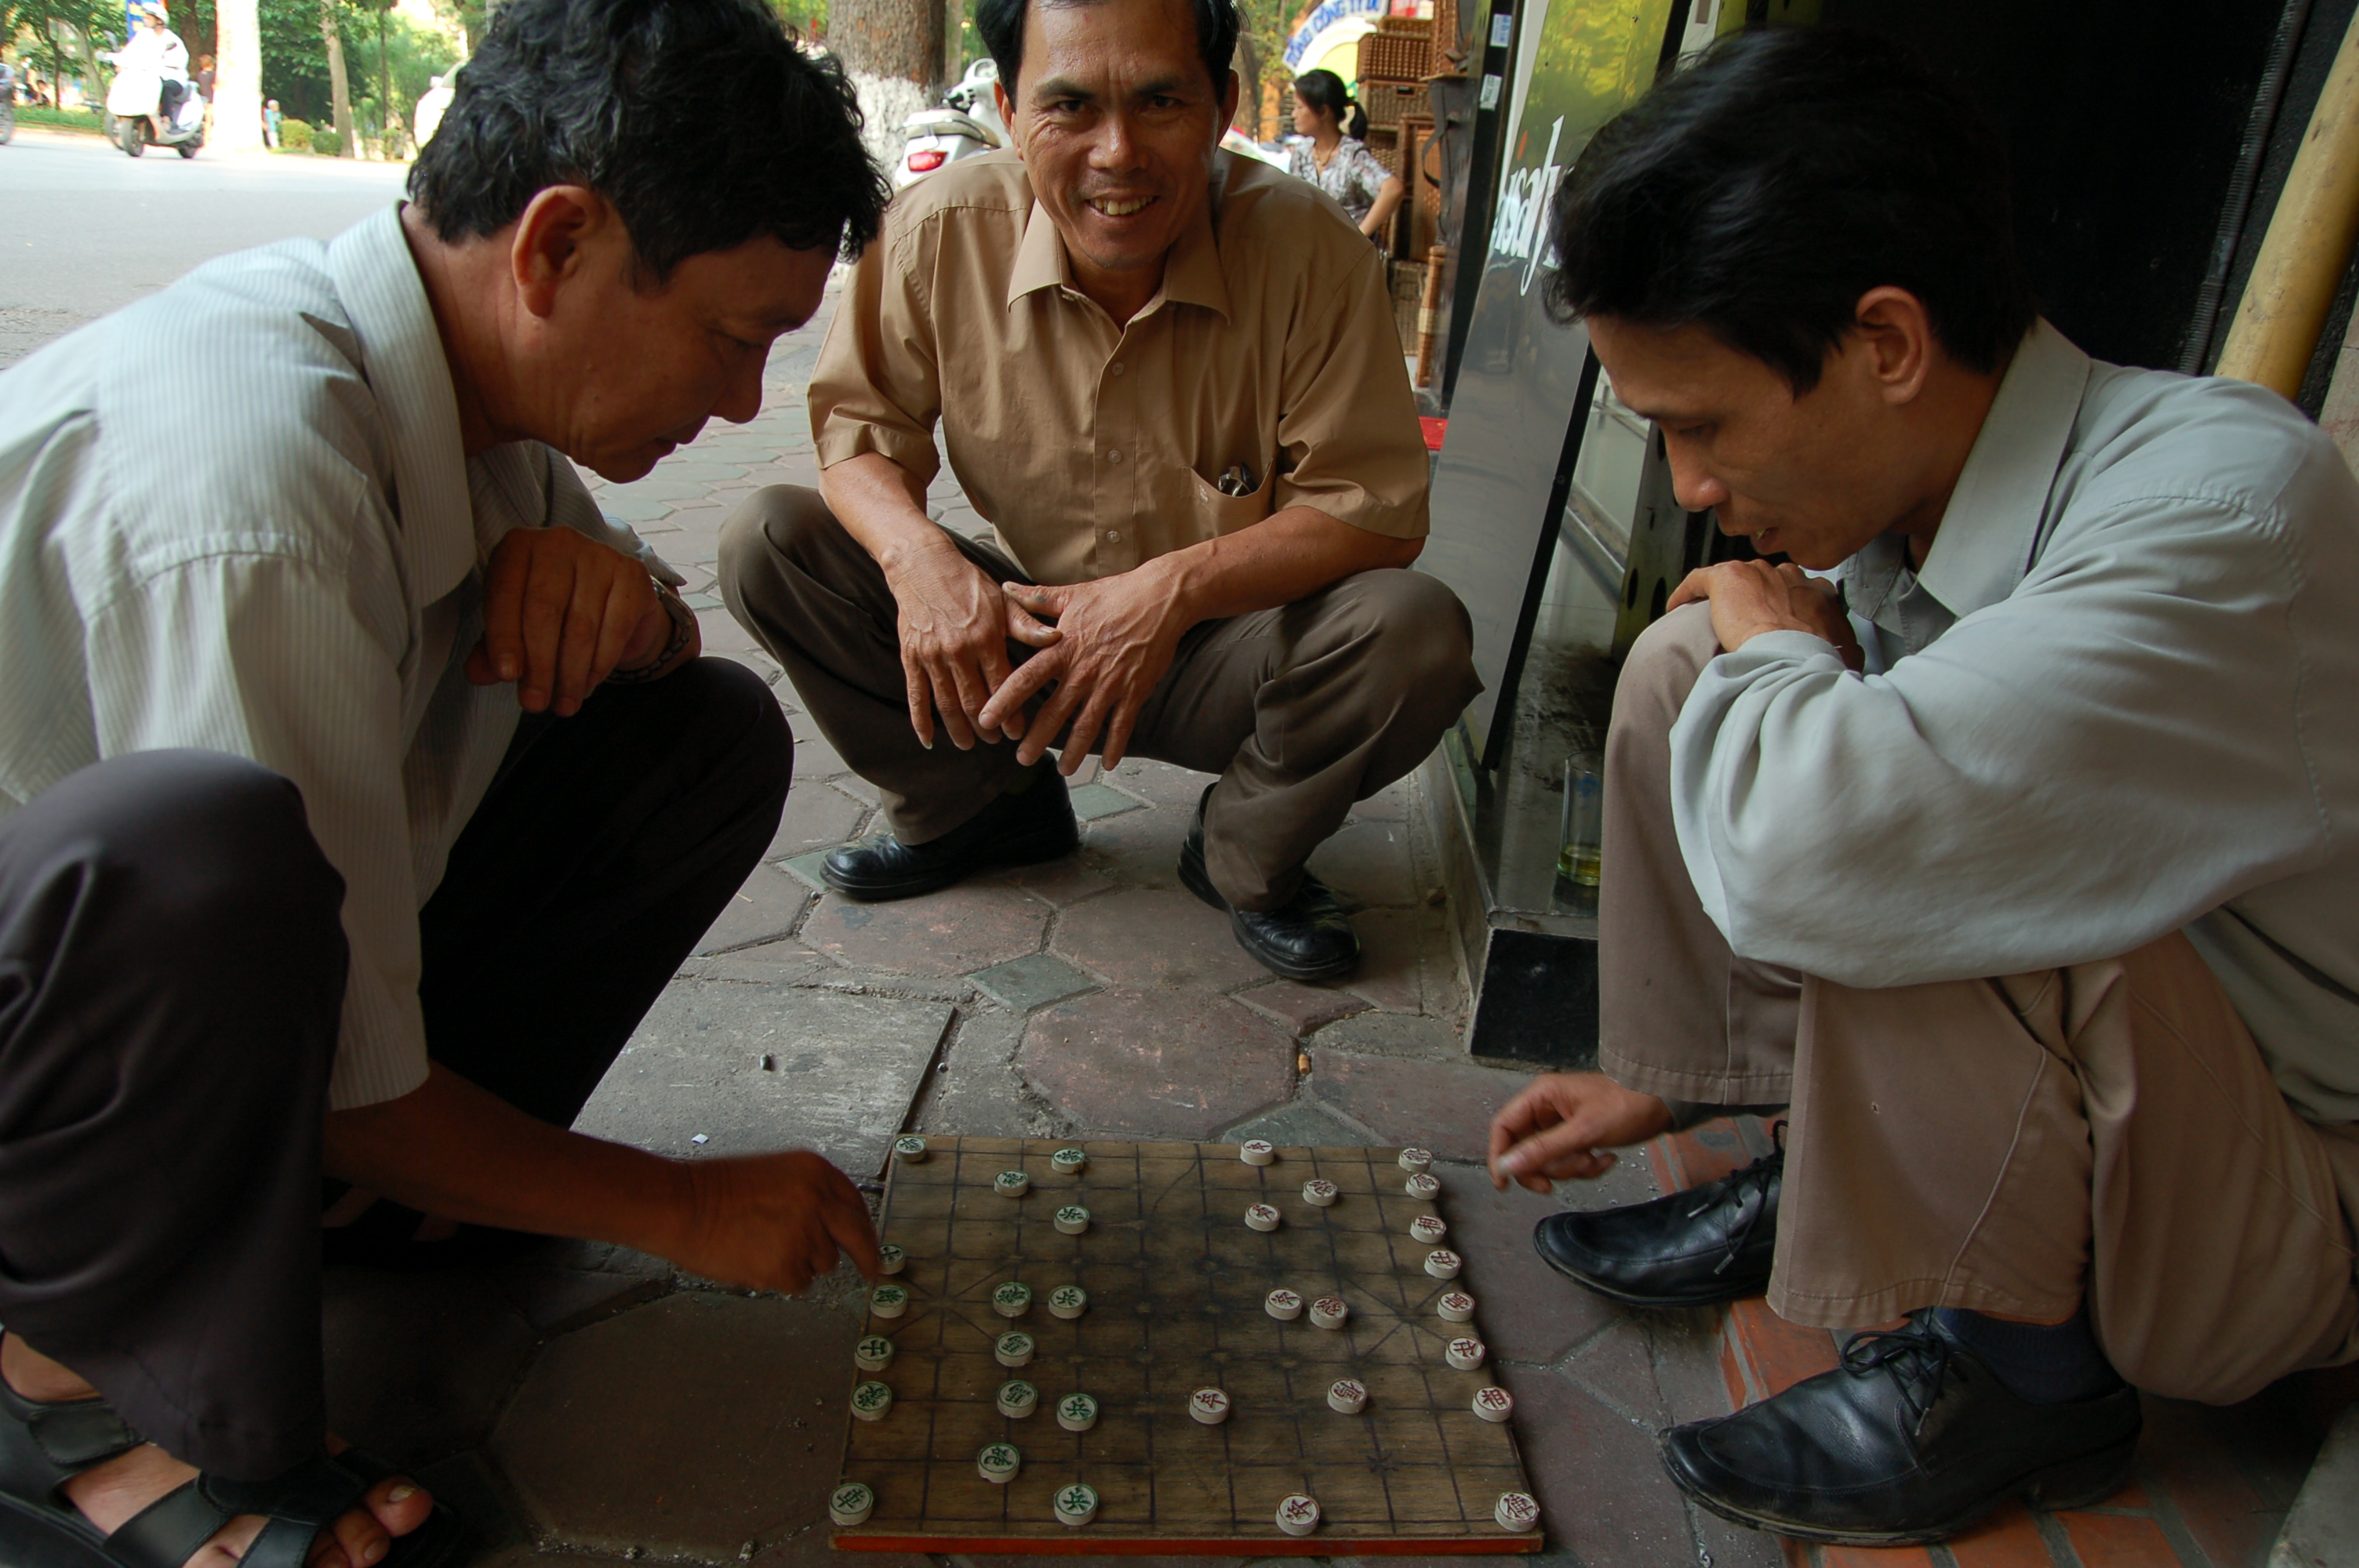 File:Players of chinese checkers.jpg - Wikimedia Commons